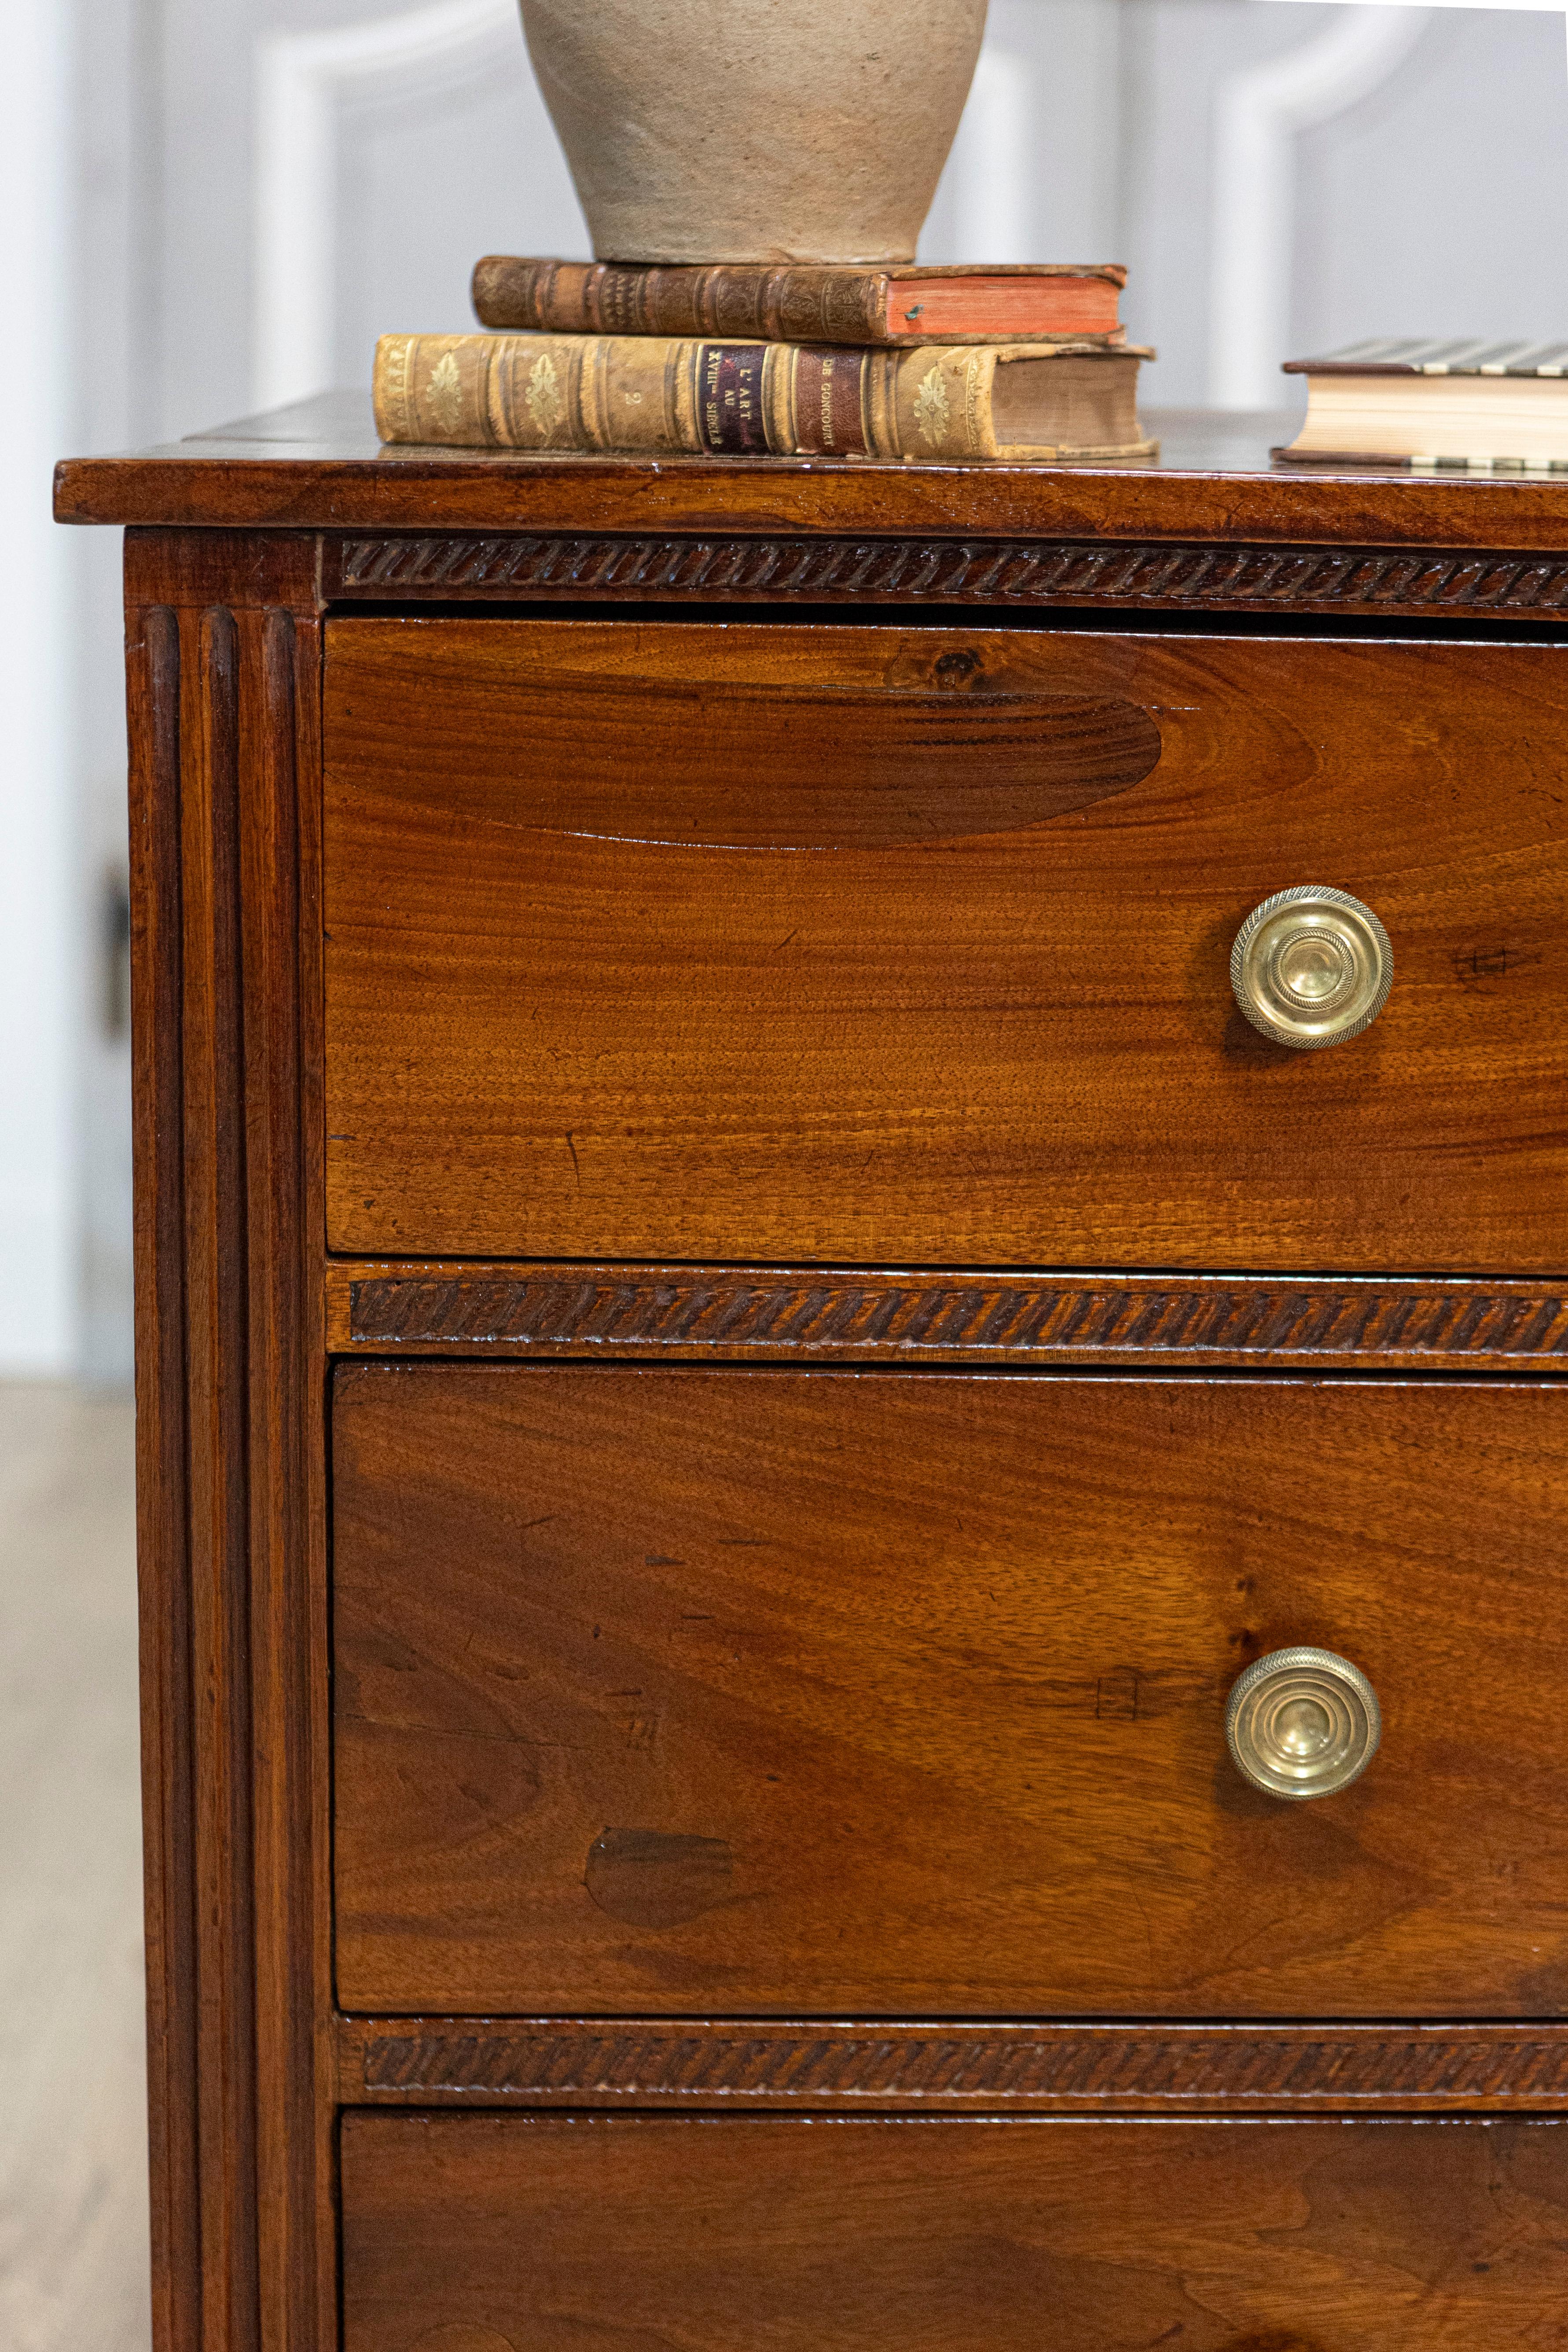 Italian Directoire Period Late 18th Century Three Drawer Walnut Bedside Chest For Sale 8